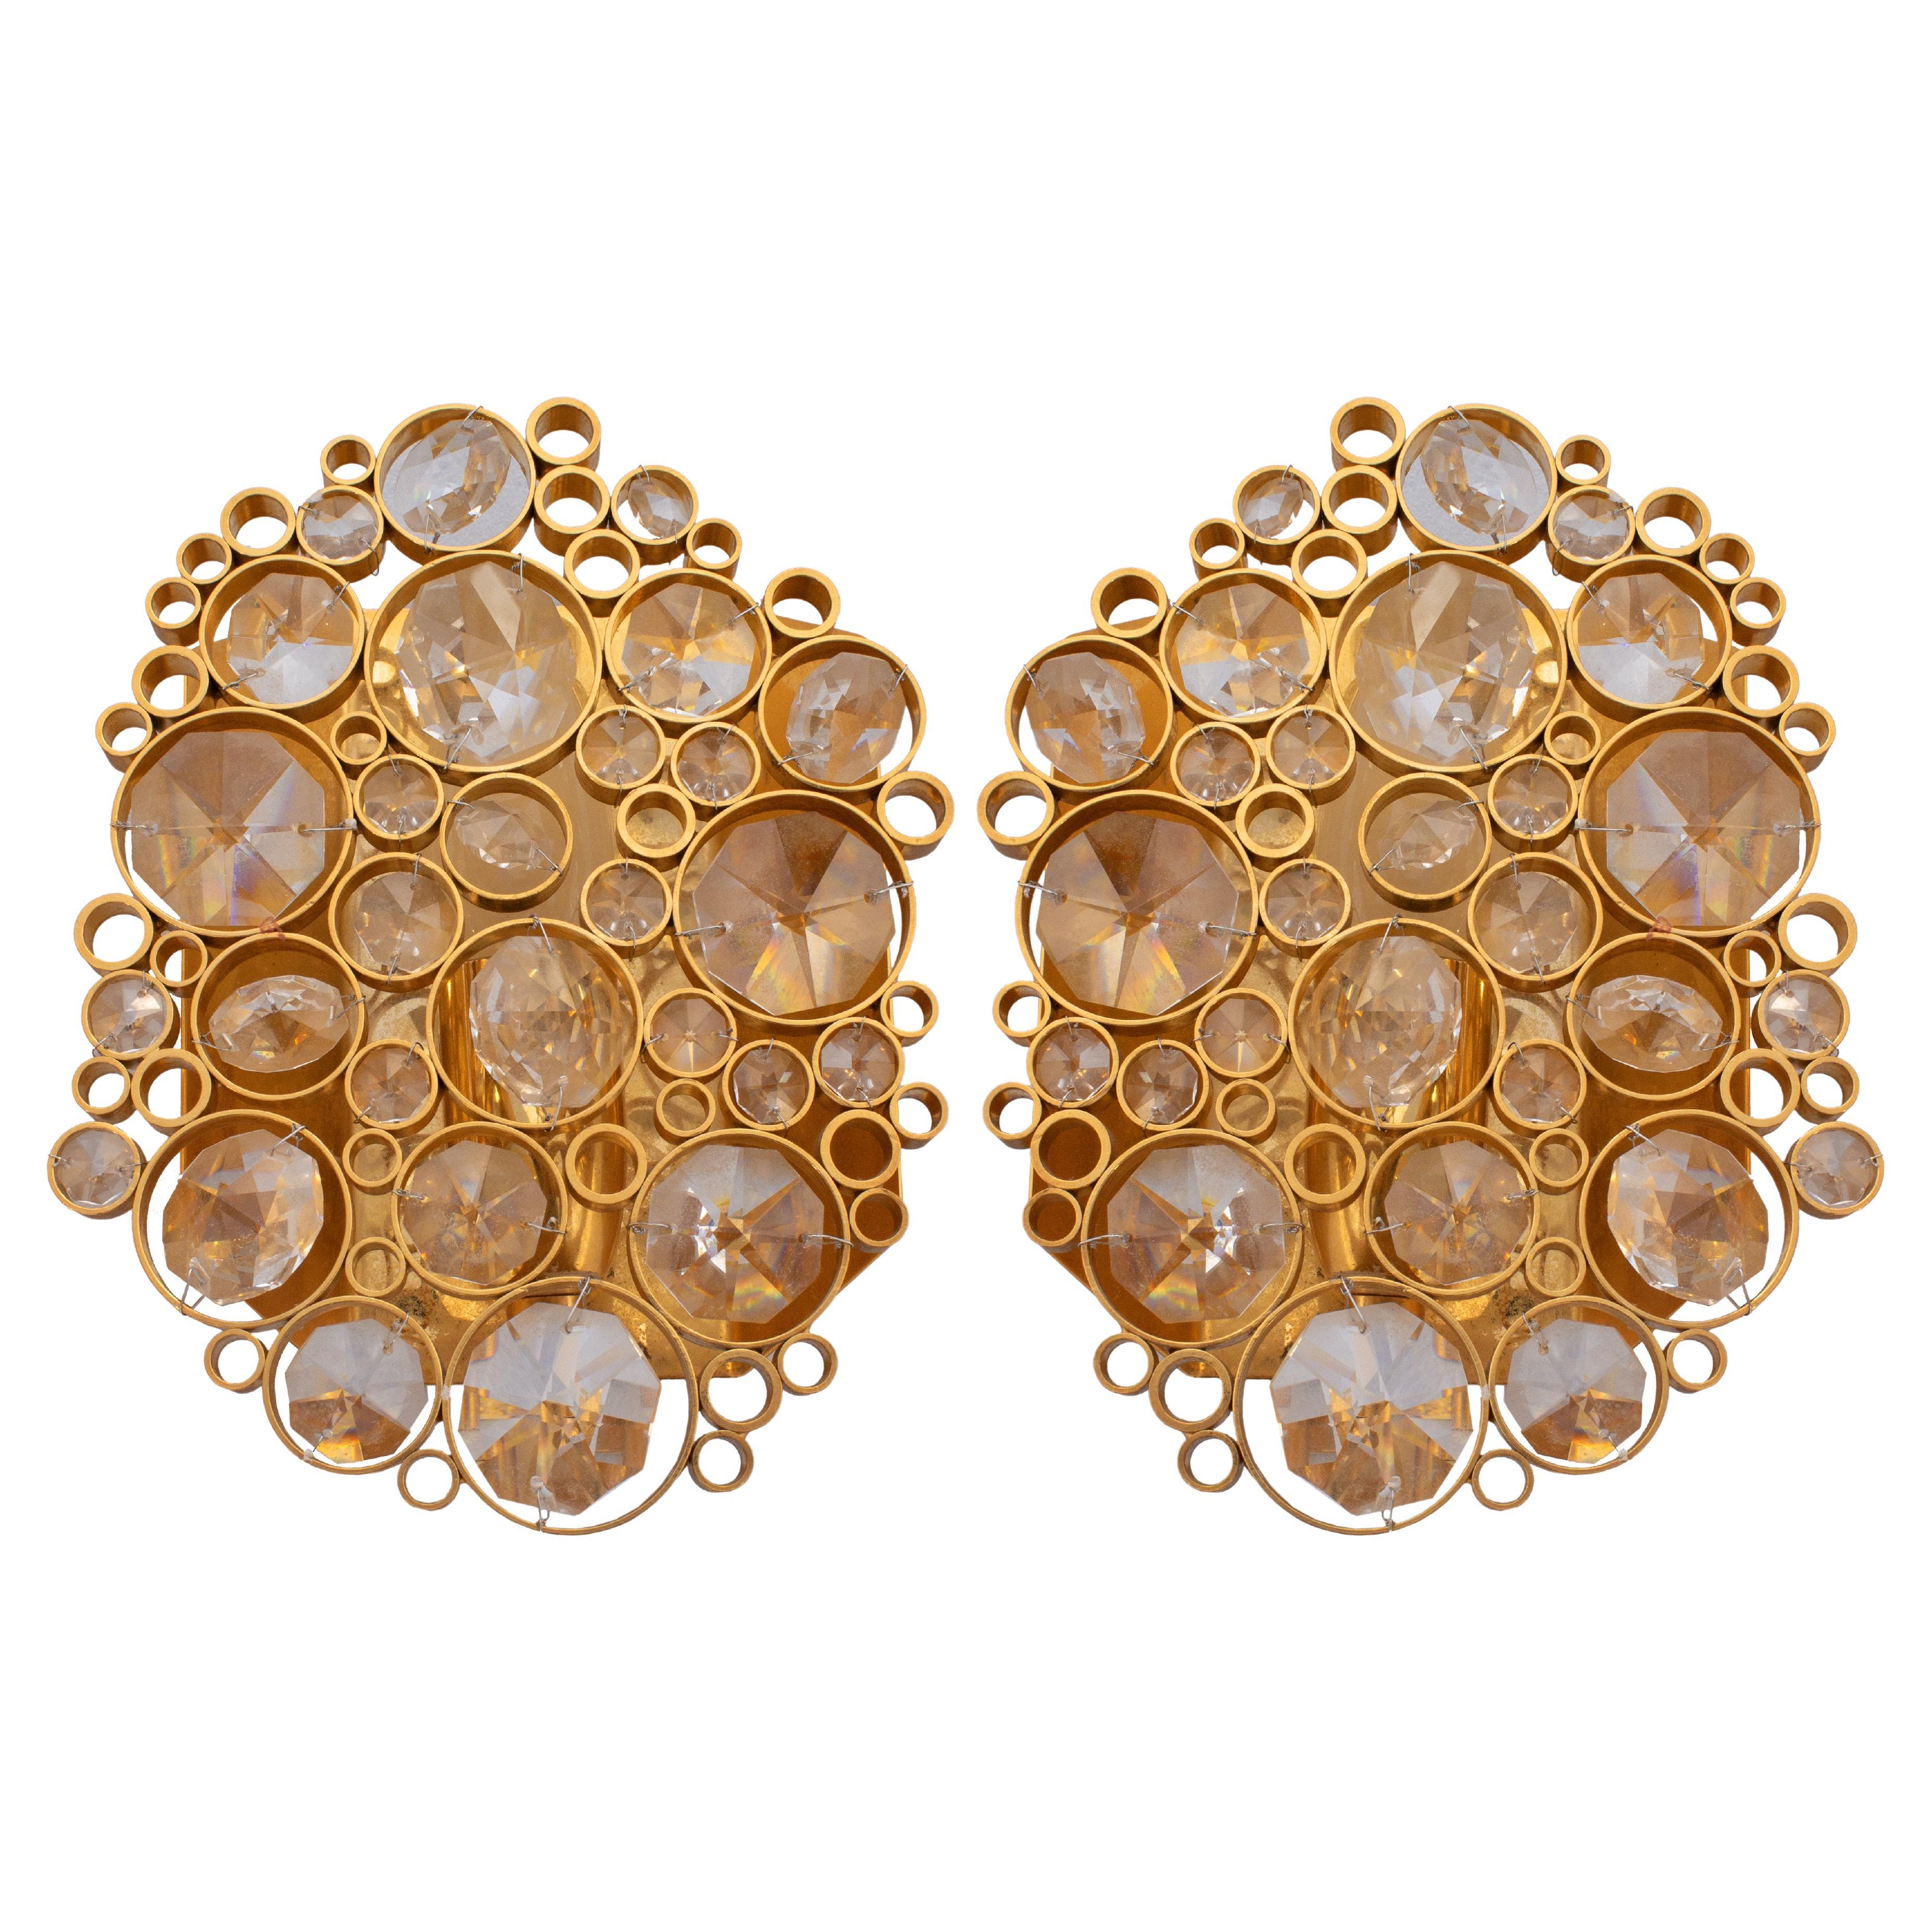 Pair of Modernist Crystal Wall Scones by Palwa in Gilded Brass